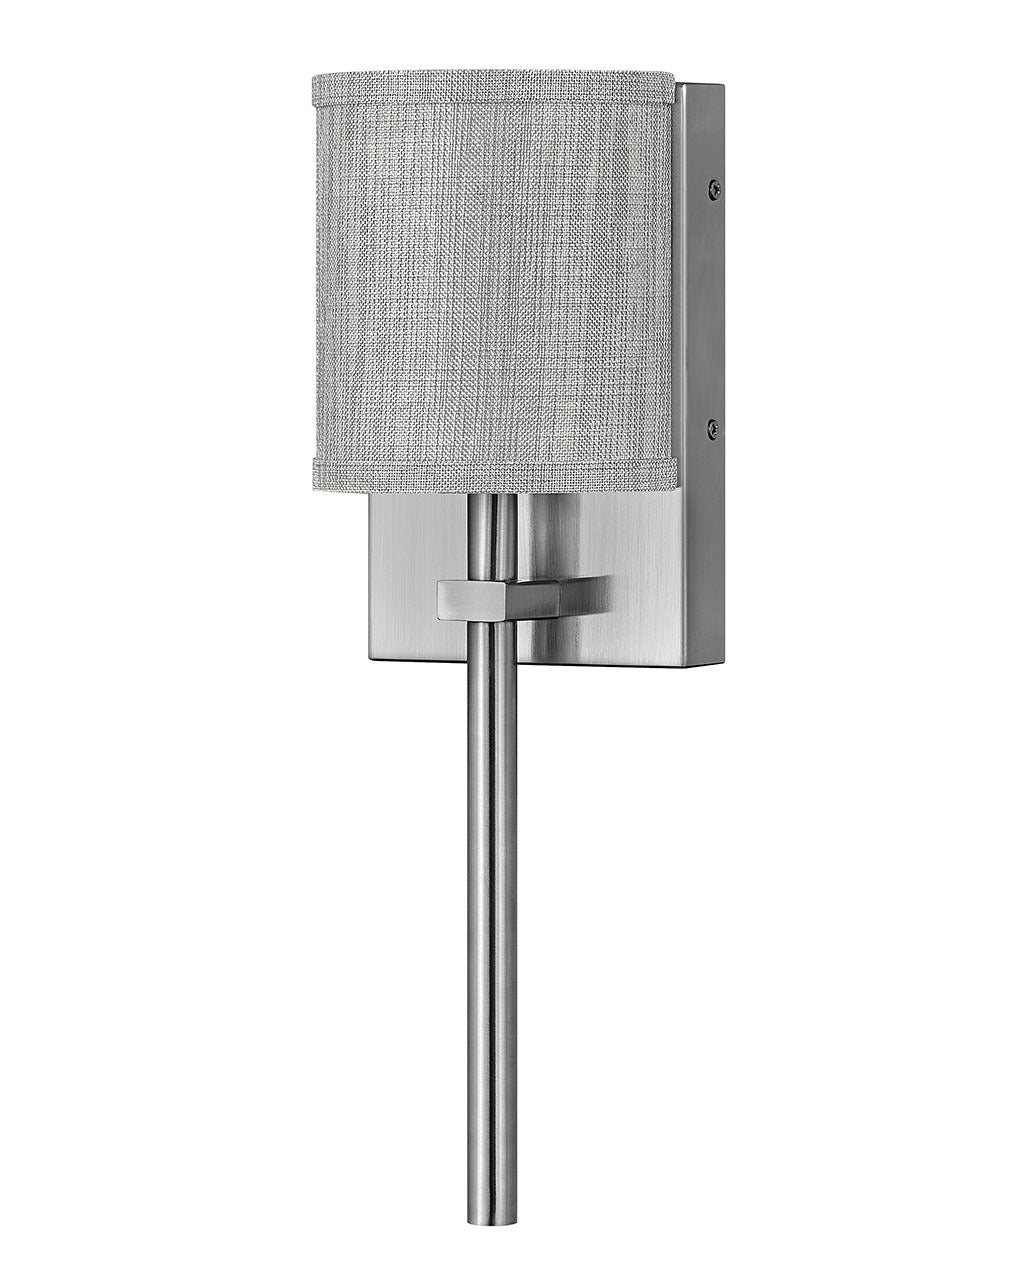 Hinkley - 41009BN - LED Wall Sconce - Avenue Heathered Gray - Brushed Nickel